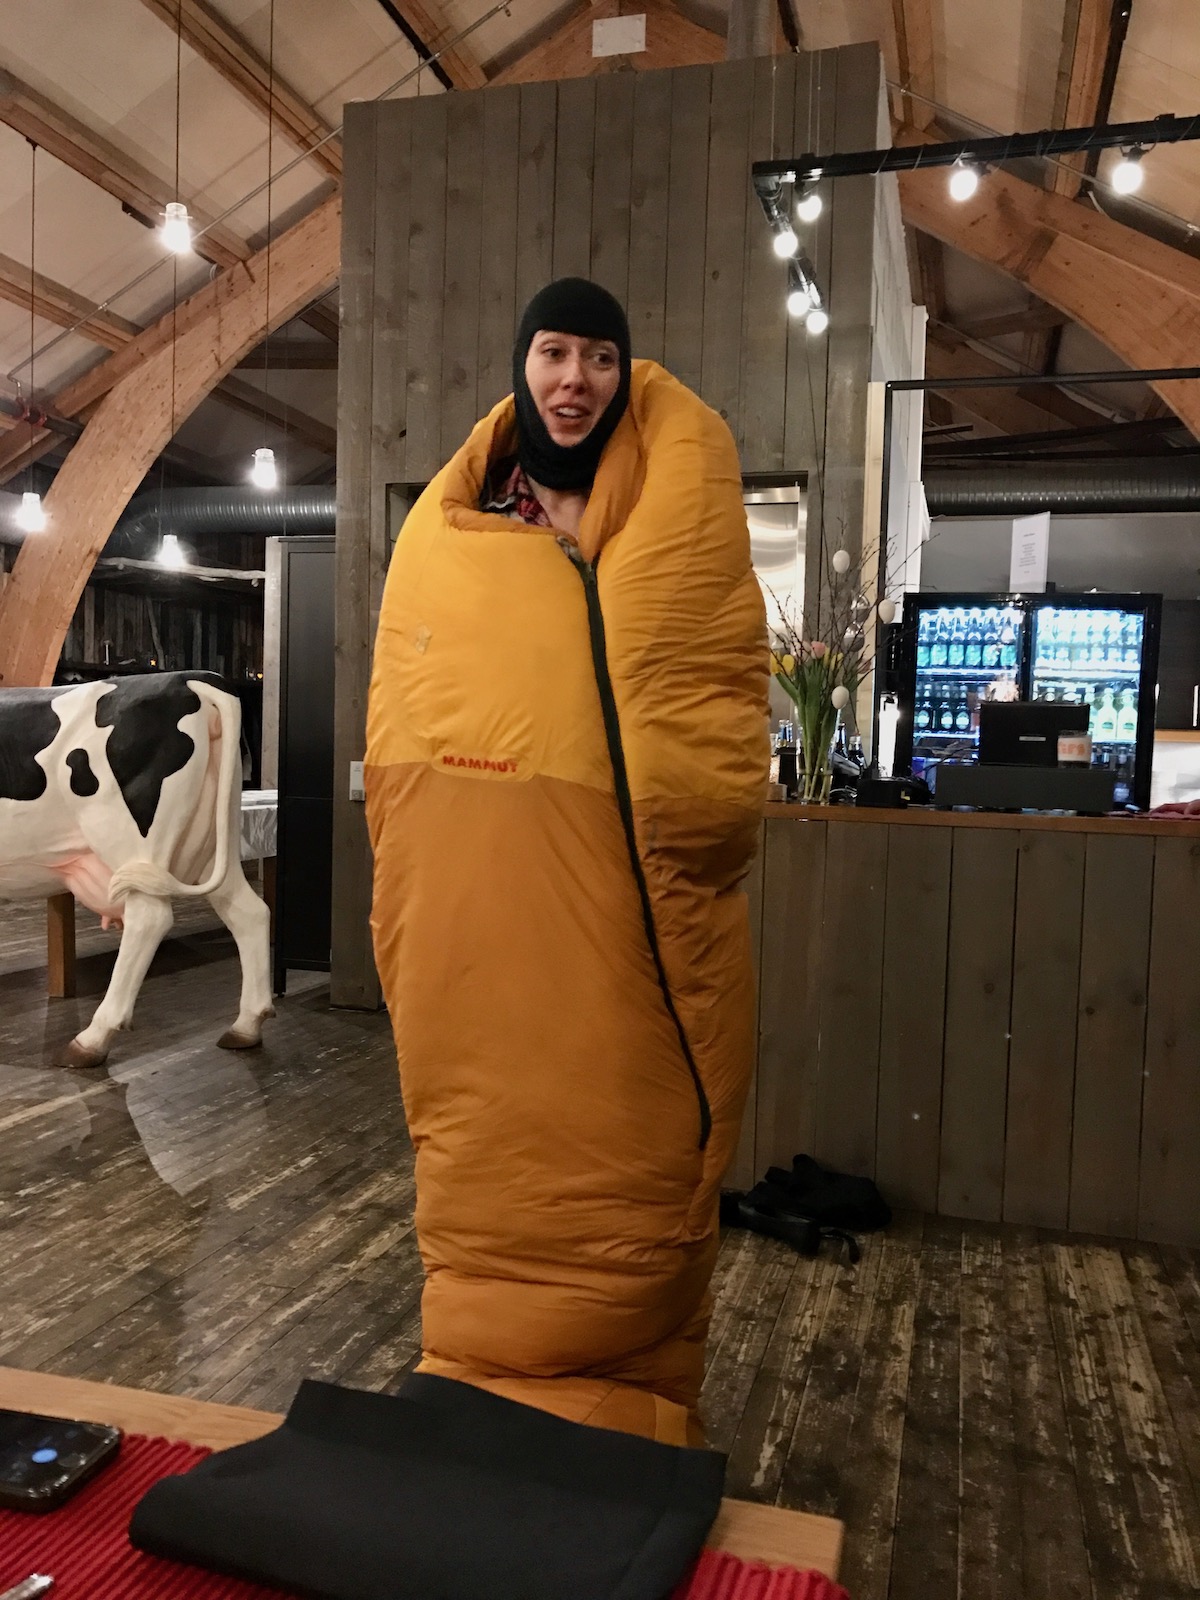 A female guide wrapped in a sleeping bag explains how to stay warm while sleeping in an ice hotel in Norway